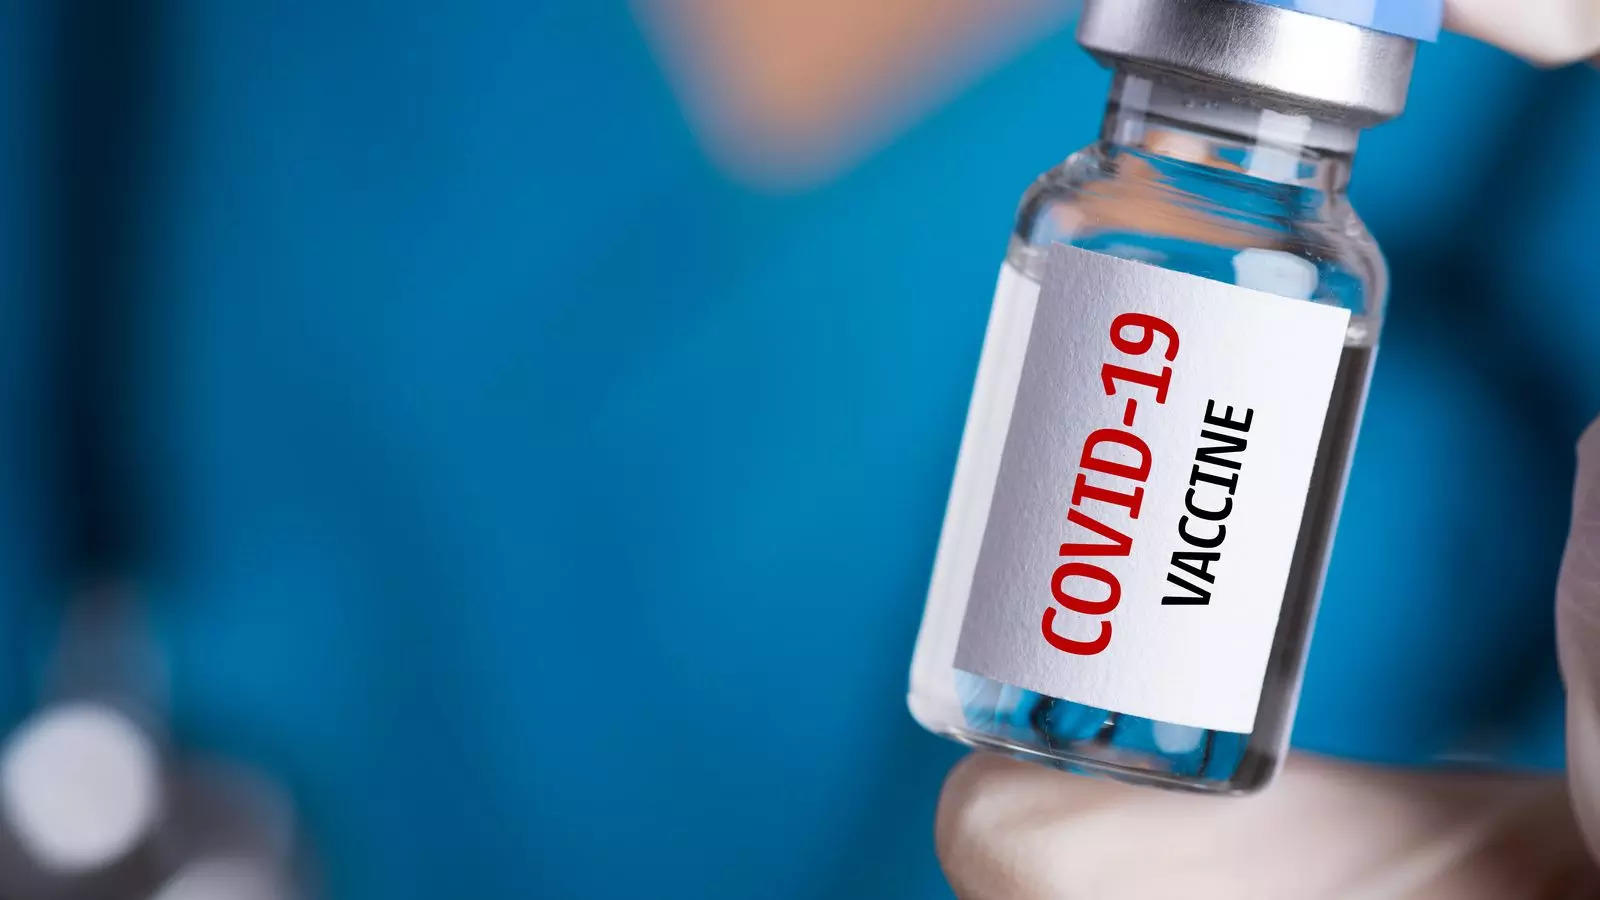 Moderna considers pricing COVID vaccine at $110-$130